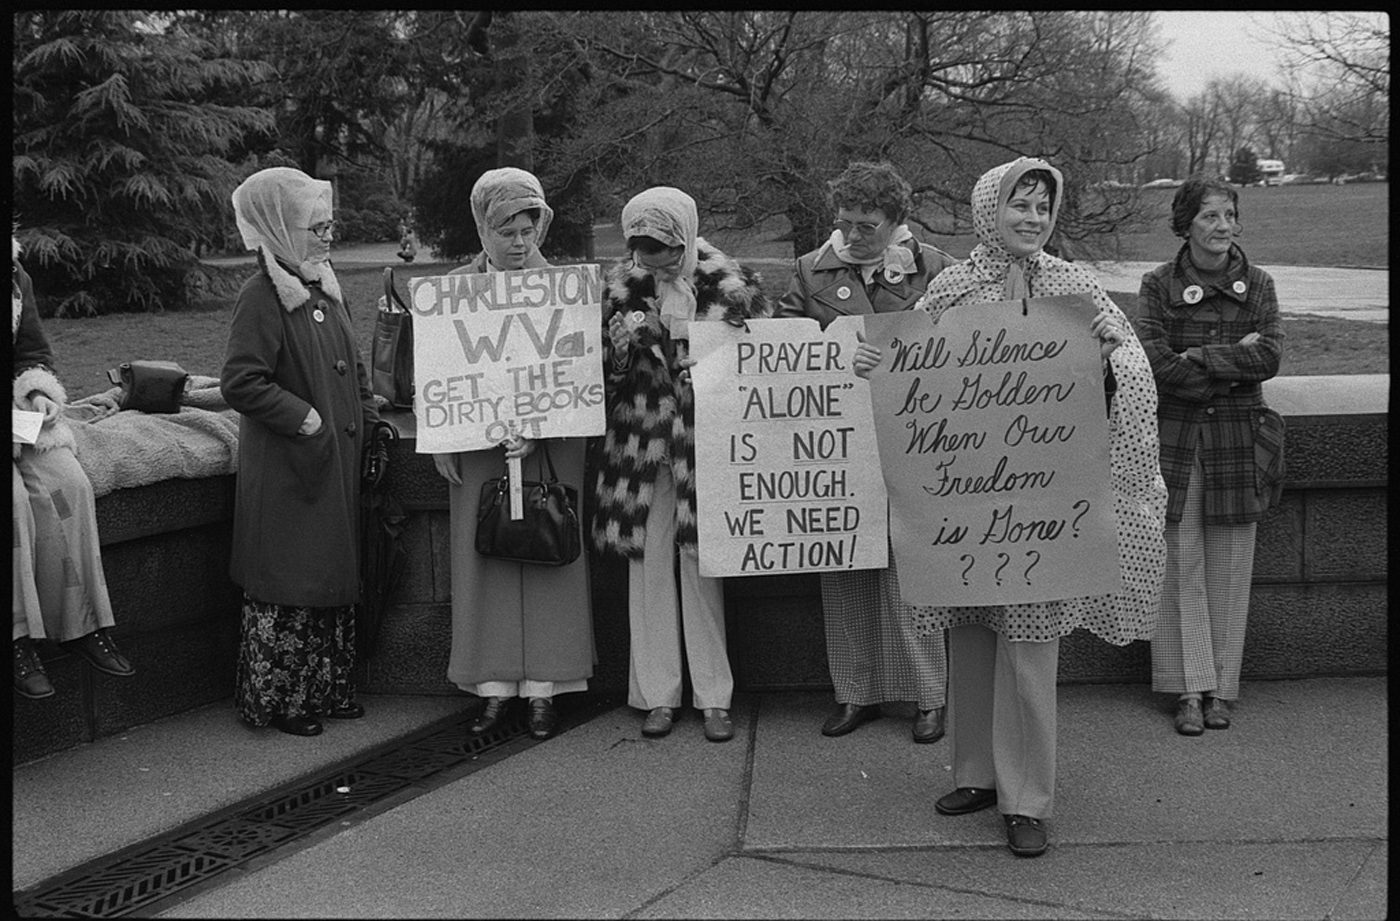 Women from Boston, Massachusetts and Charleston, West Virginia demonstrate, protesting busing and textbooks, in Washington D.C. in March 1975. Photo from the Library of Congress.